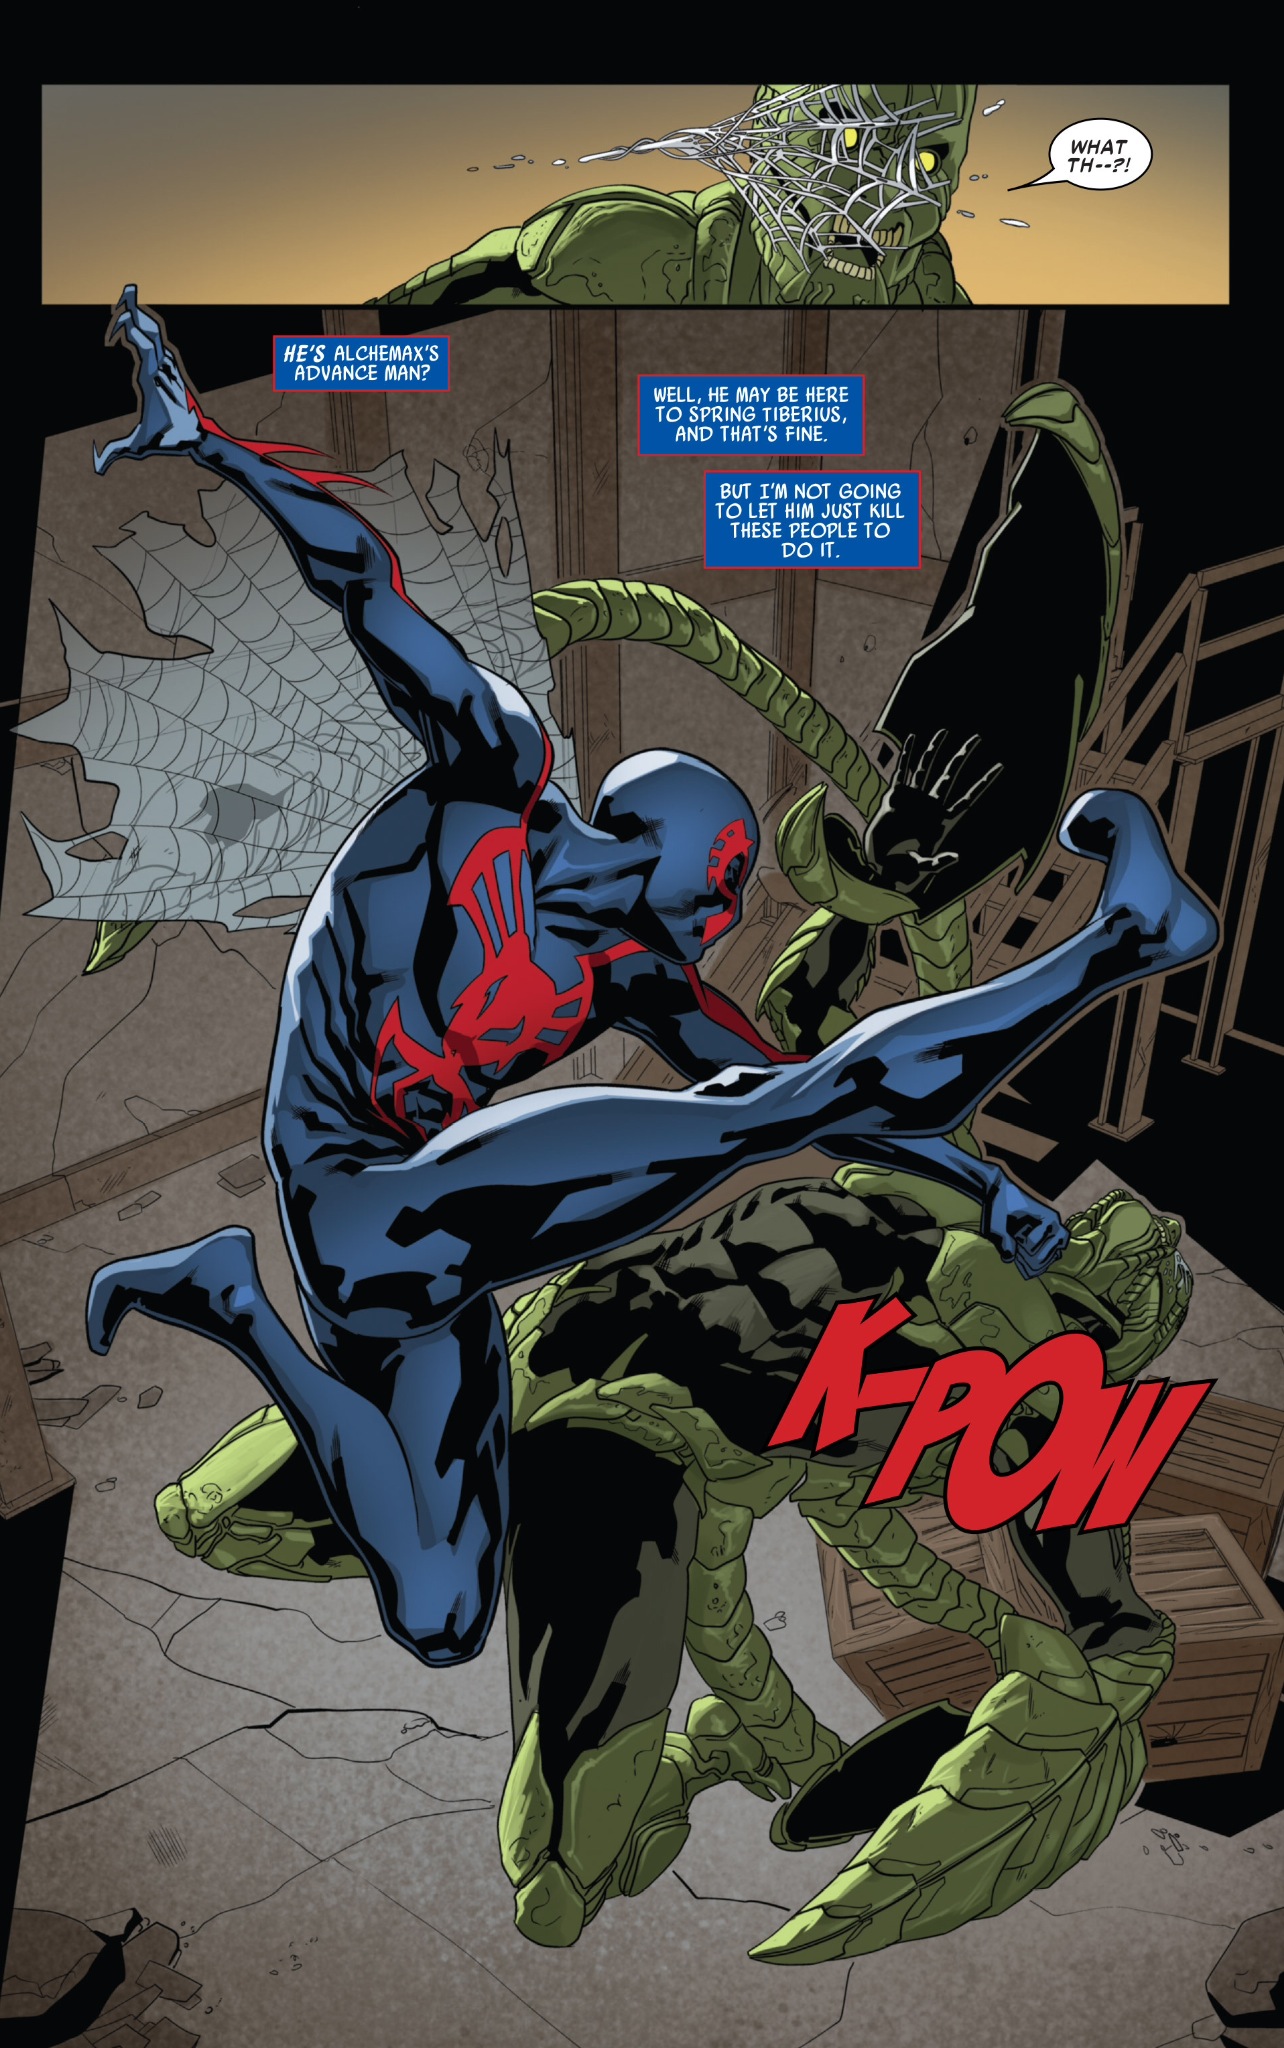 What are Spiderman's 2099 motives? Is he the main villain for the